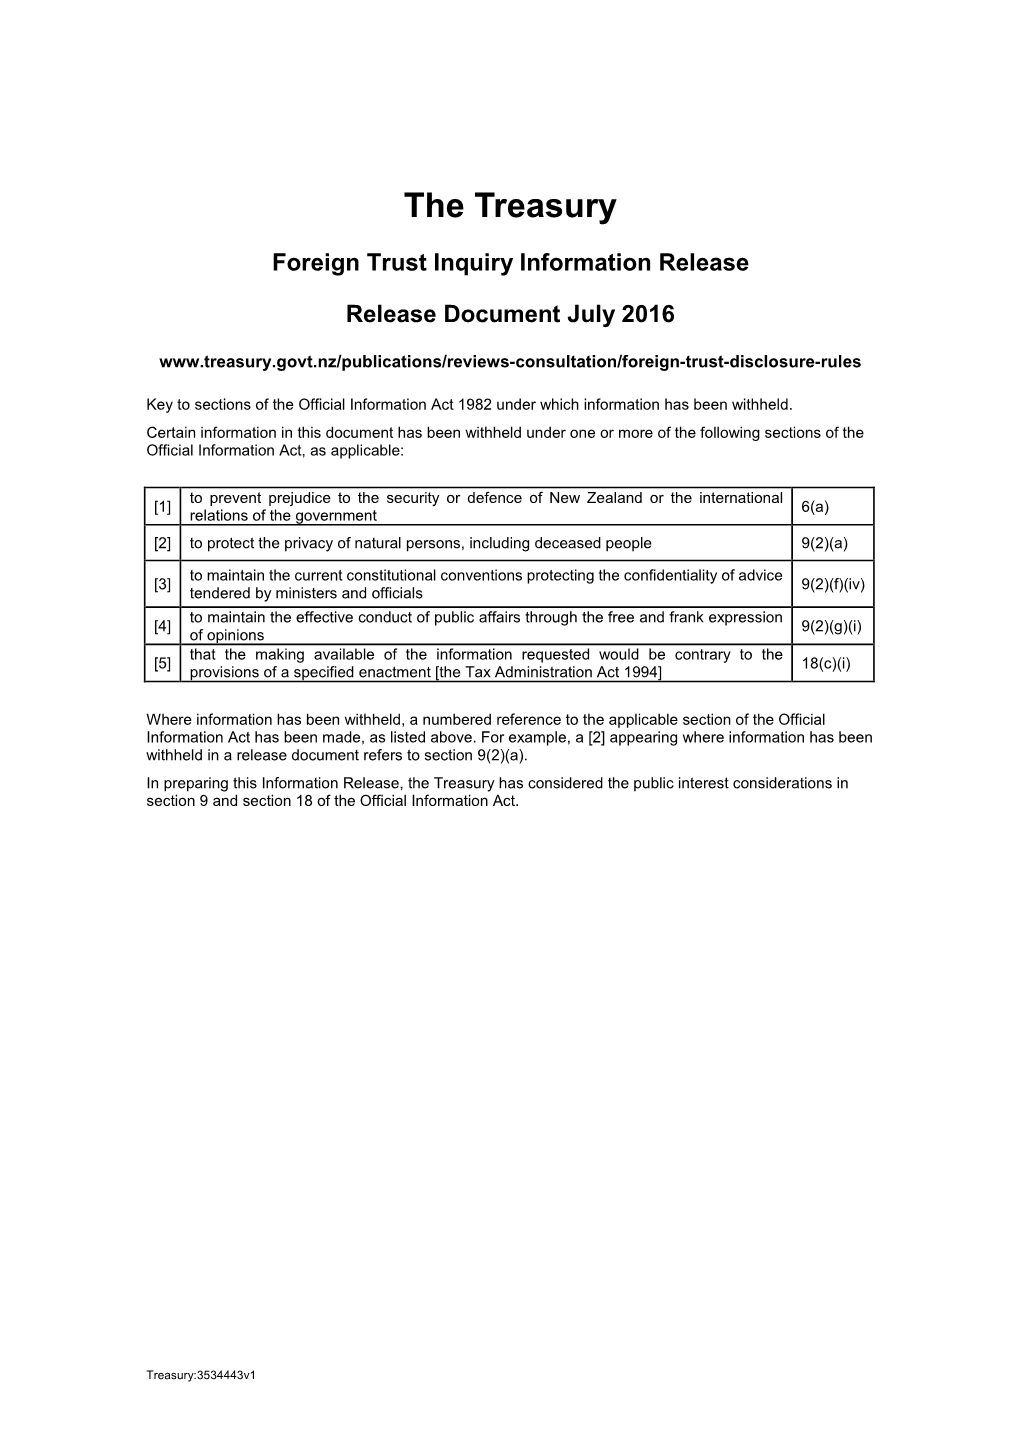 Foreign Trust Inquiry Information Release